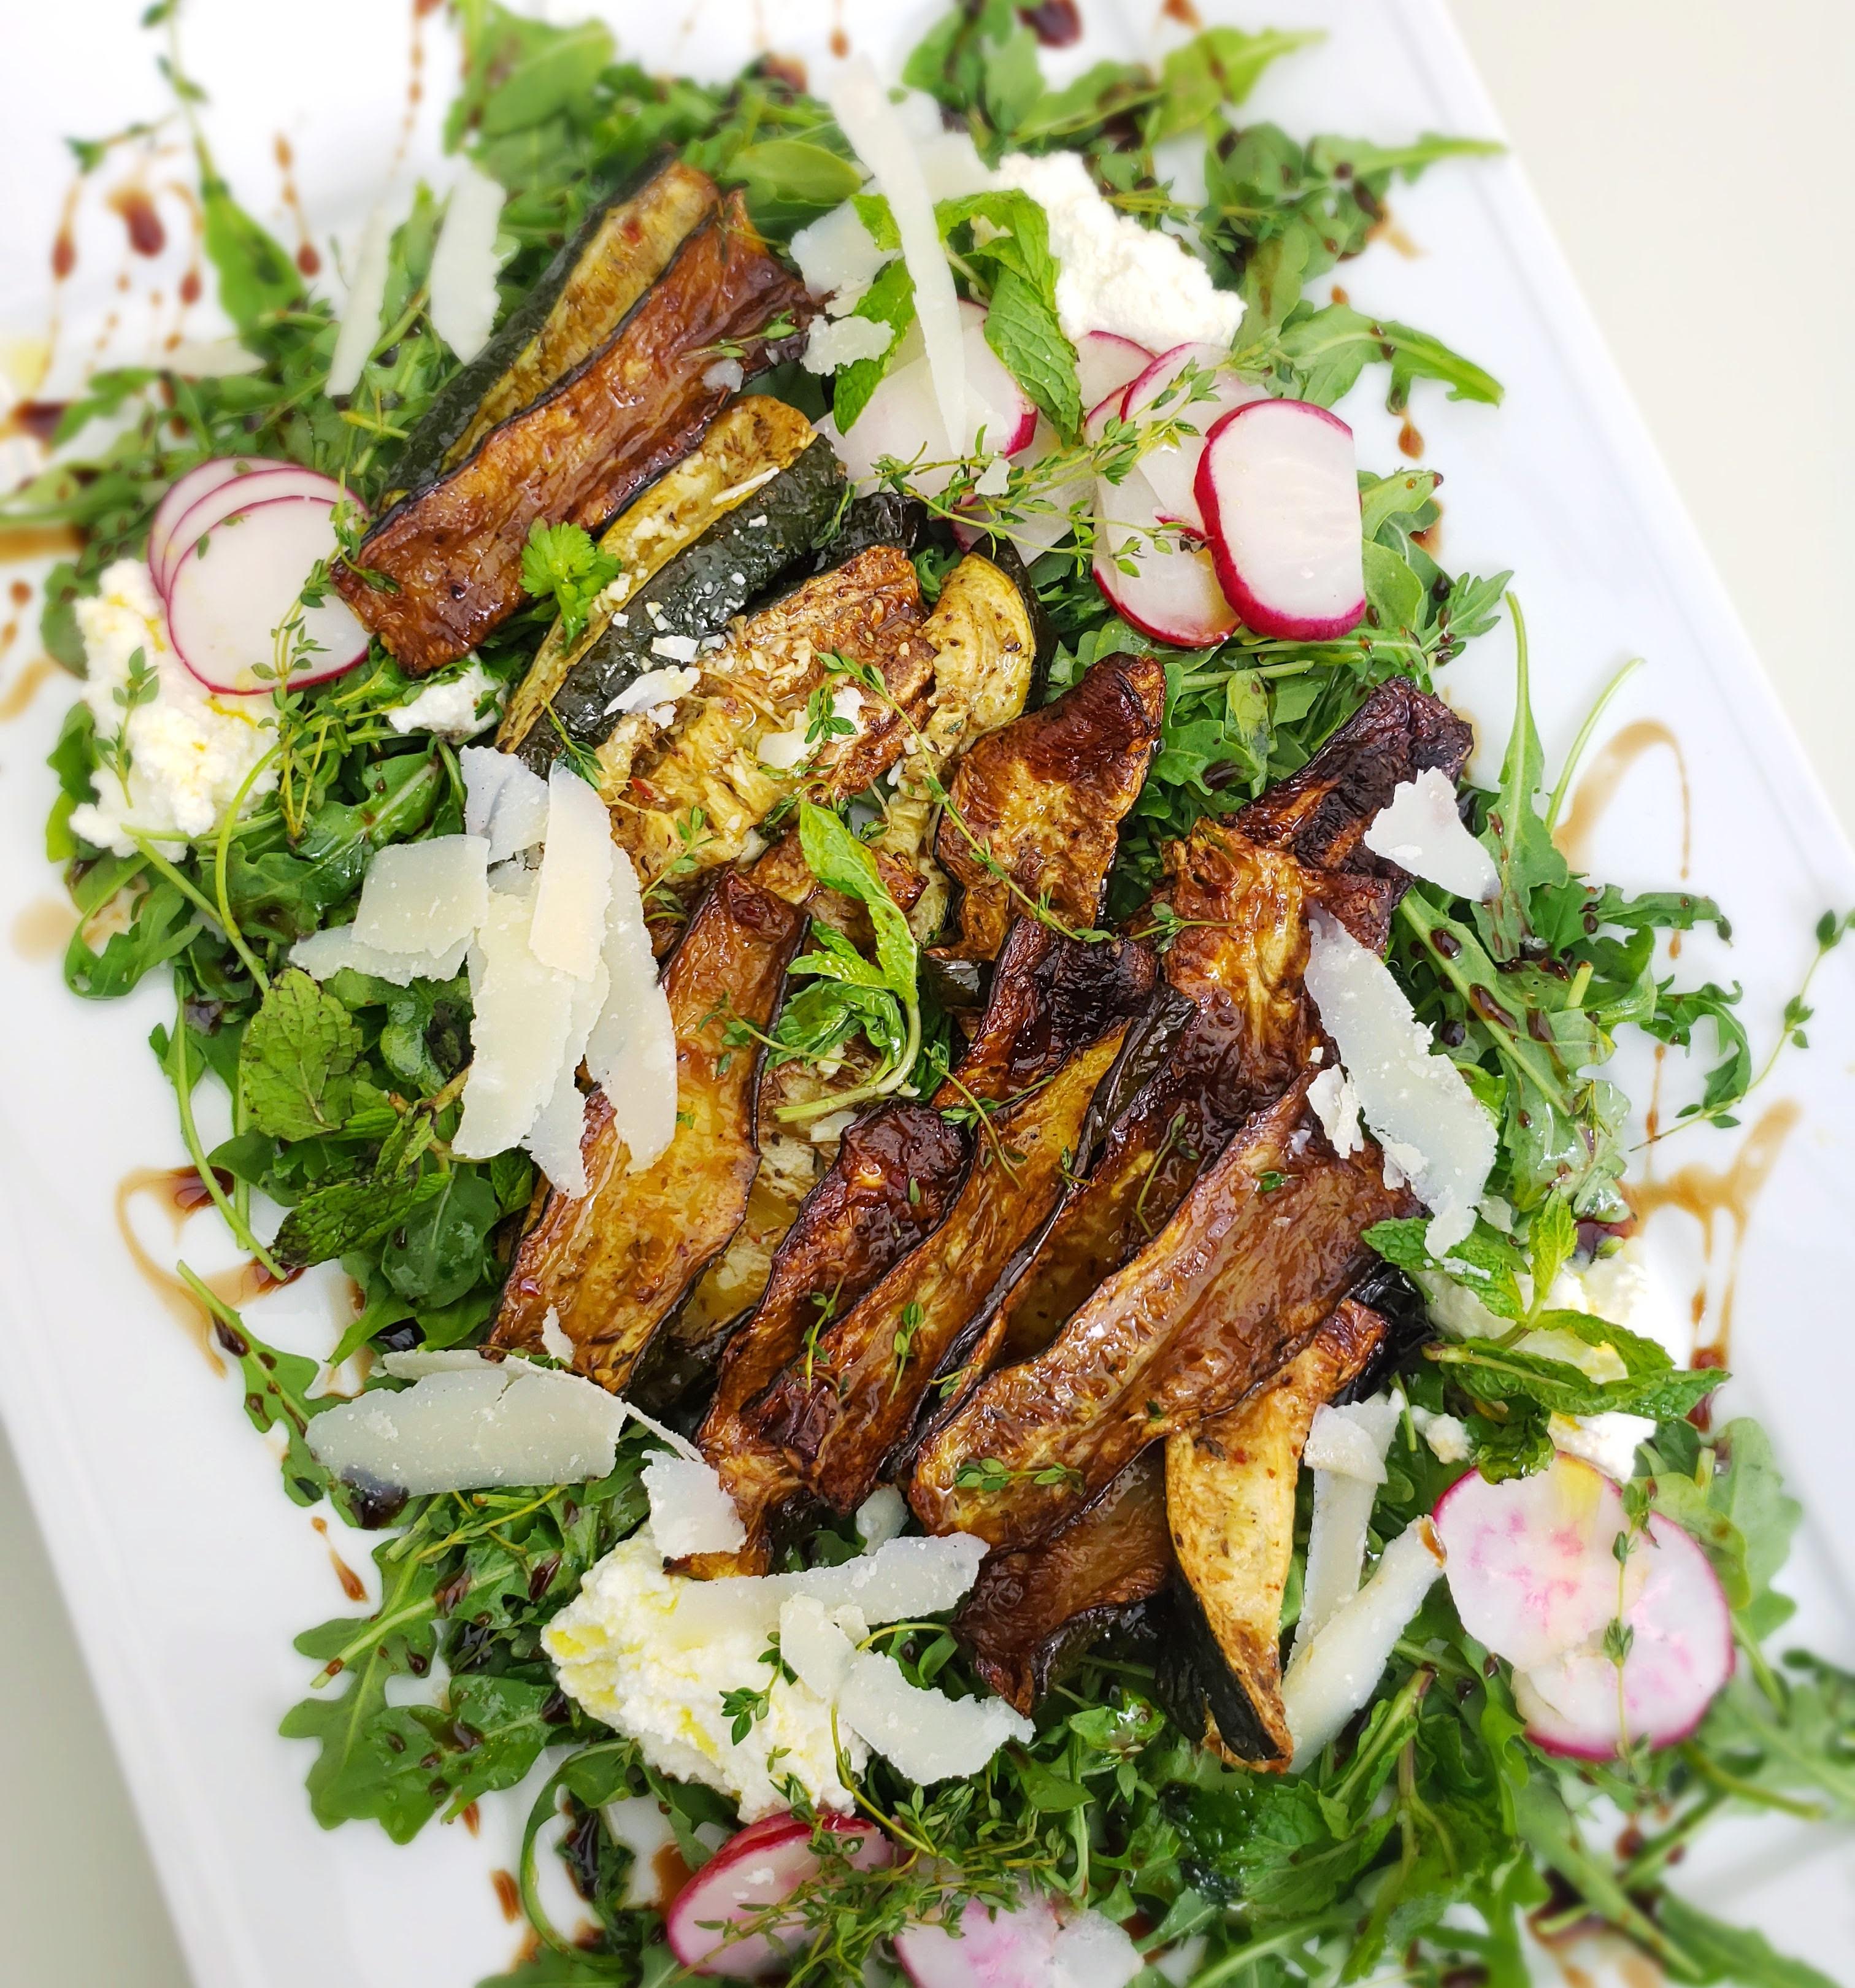 Roasted Zucchini Salad with Parmesan and Balsamic Greens